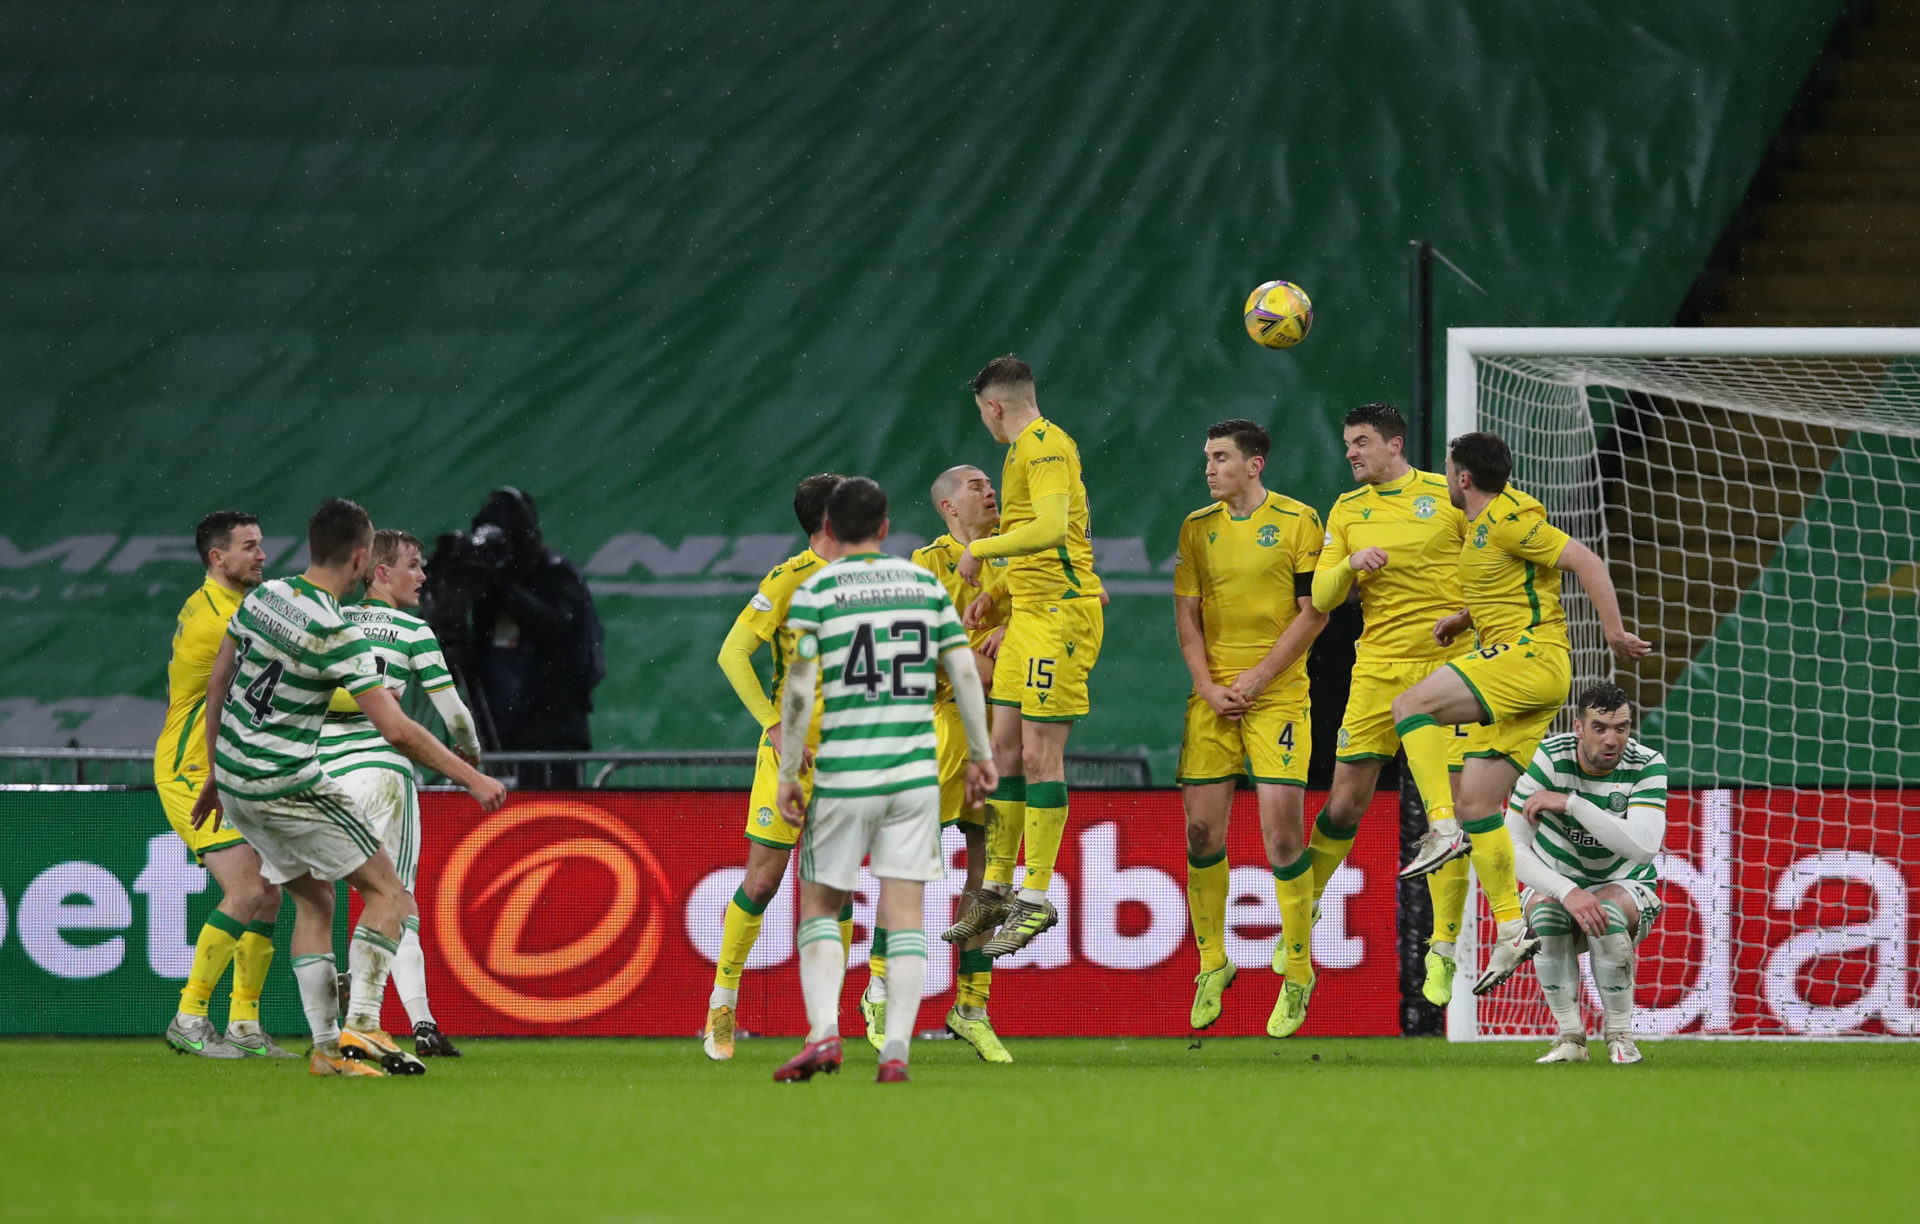 Celtic hosted Hibernian on a Monday night in January